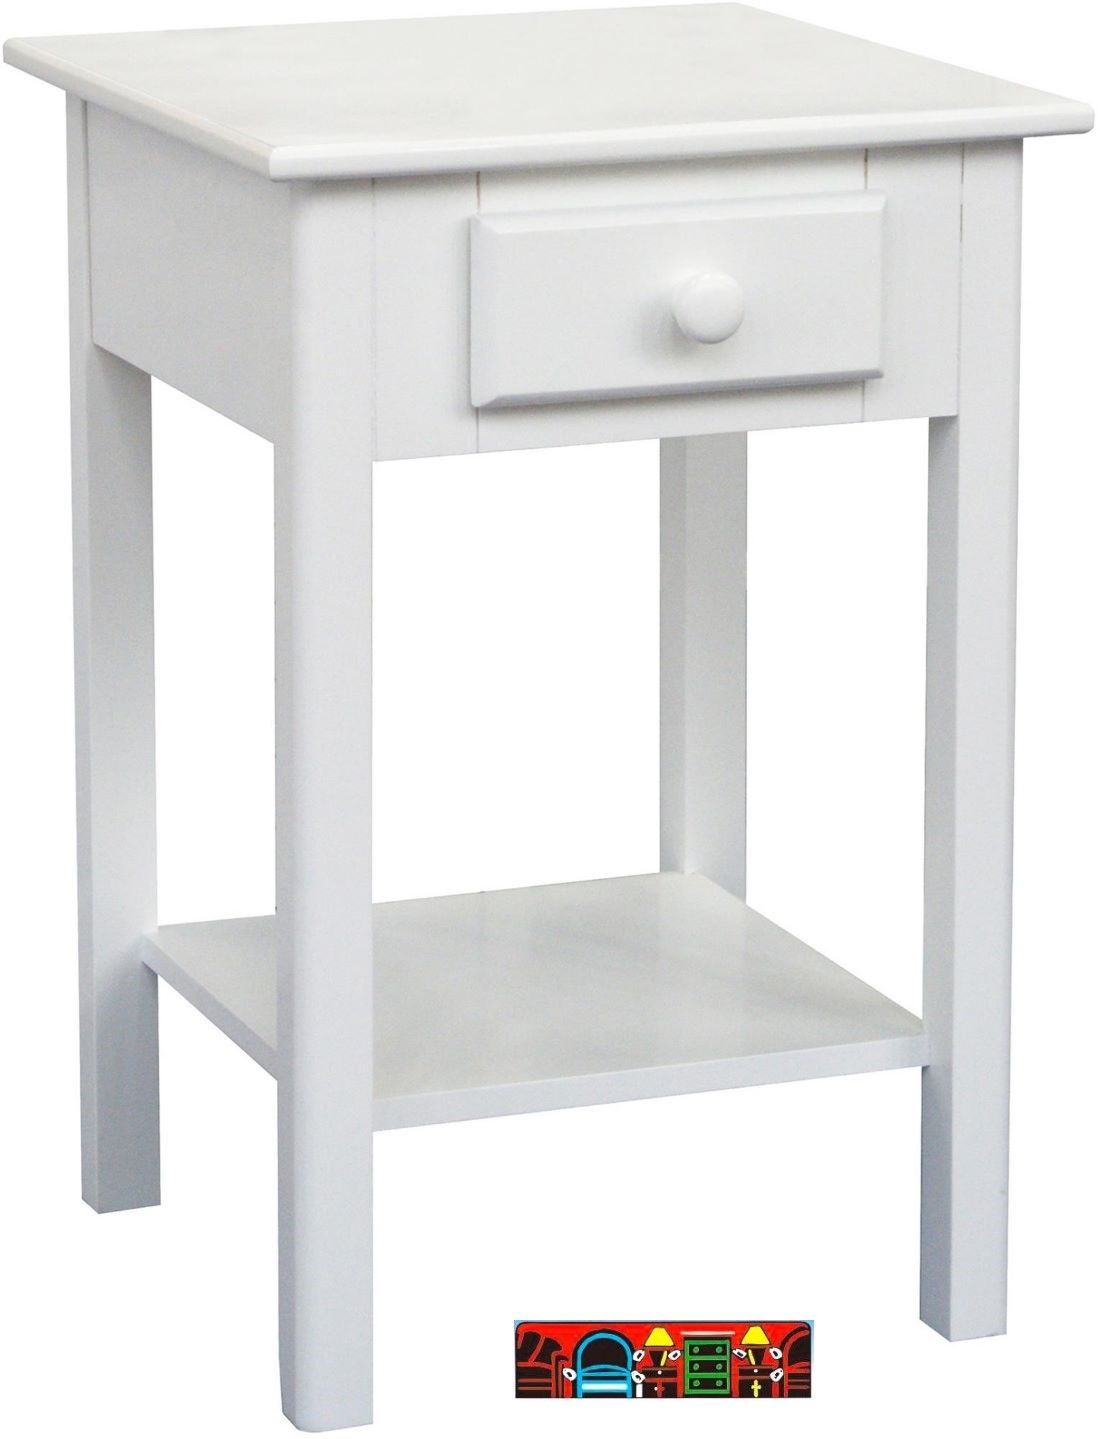 Sunset Nightstand, crafted from solid wood, featuring a white finish, one drawer and lower shelf.